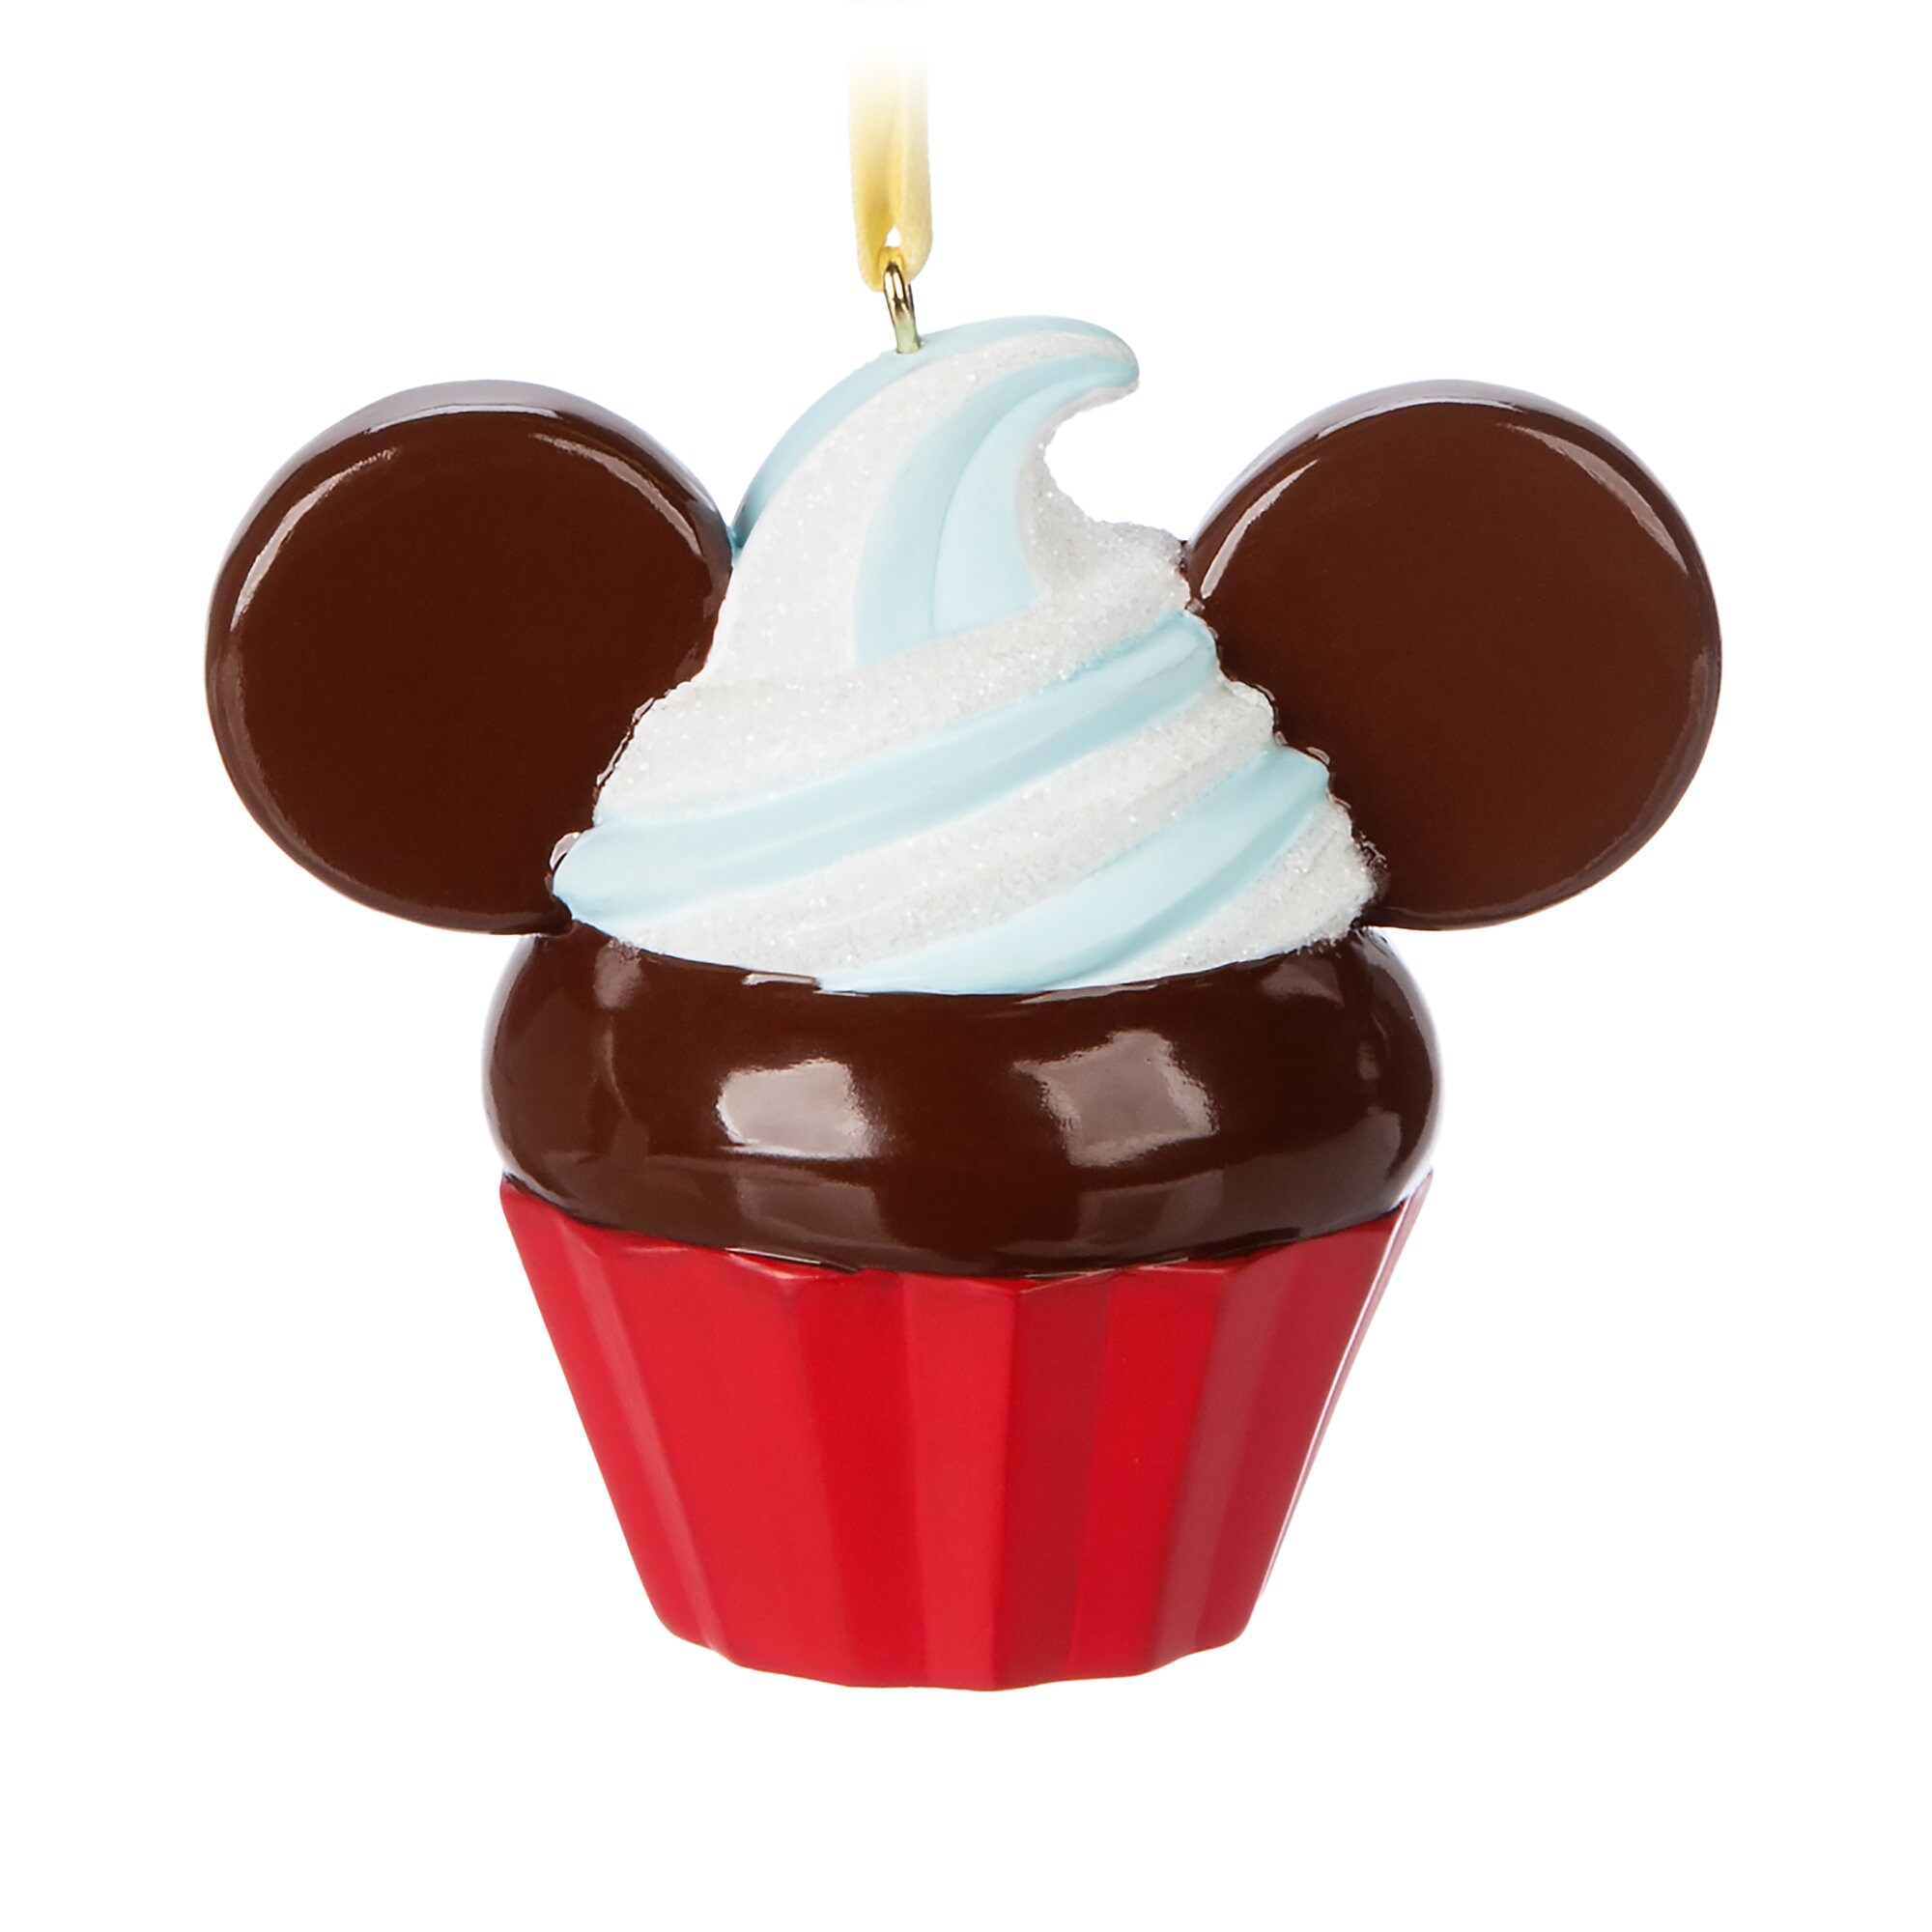 Mickey Mouse Cupcake Ornament